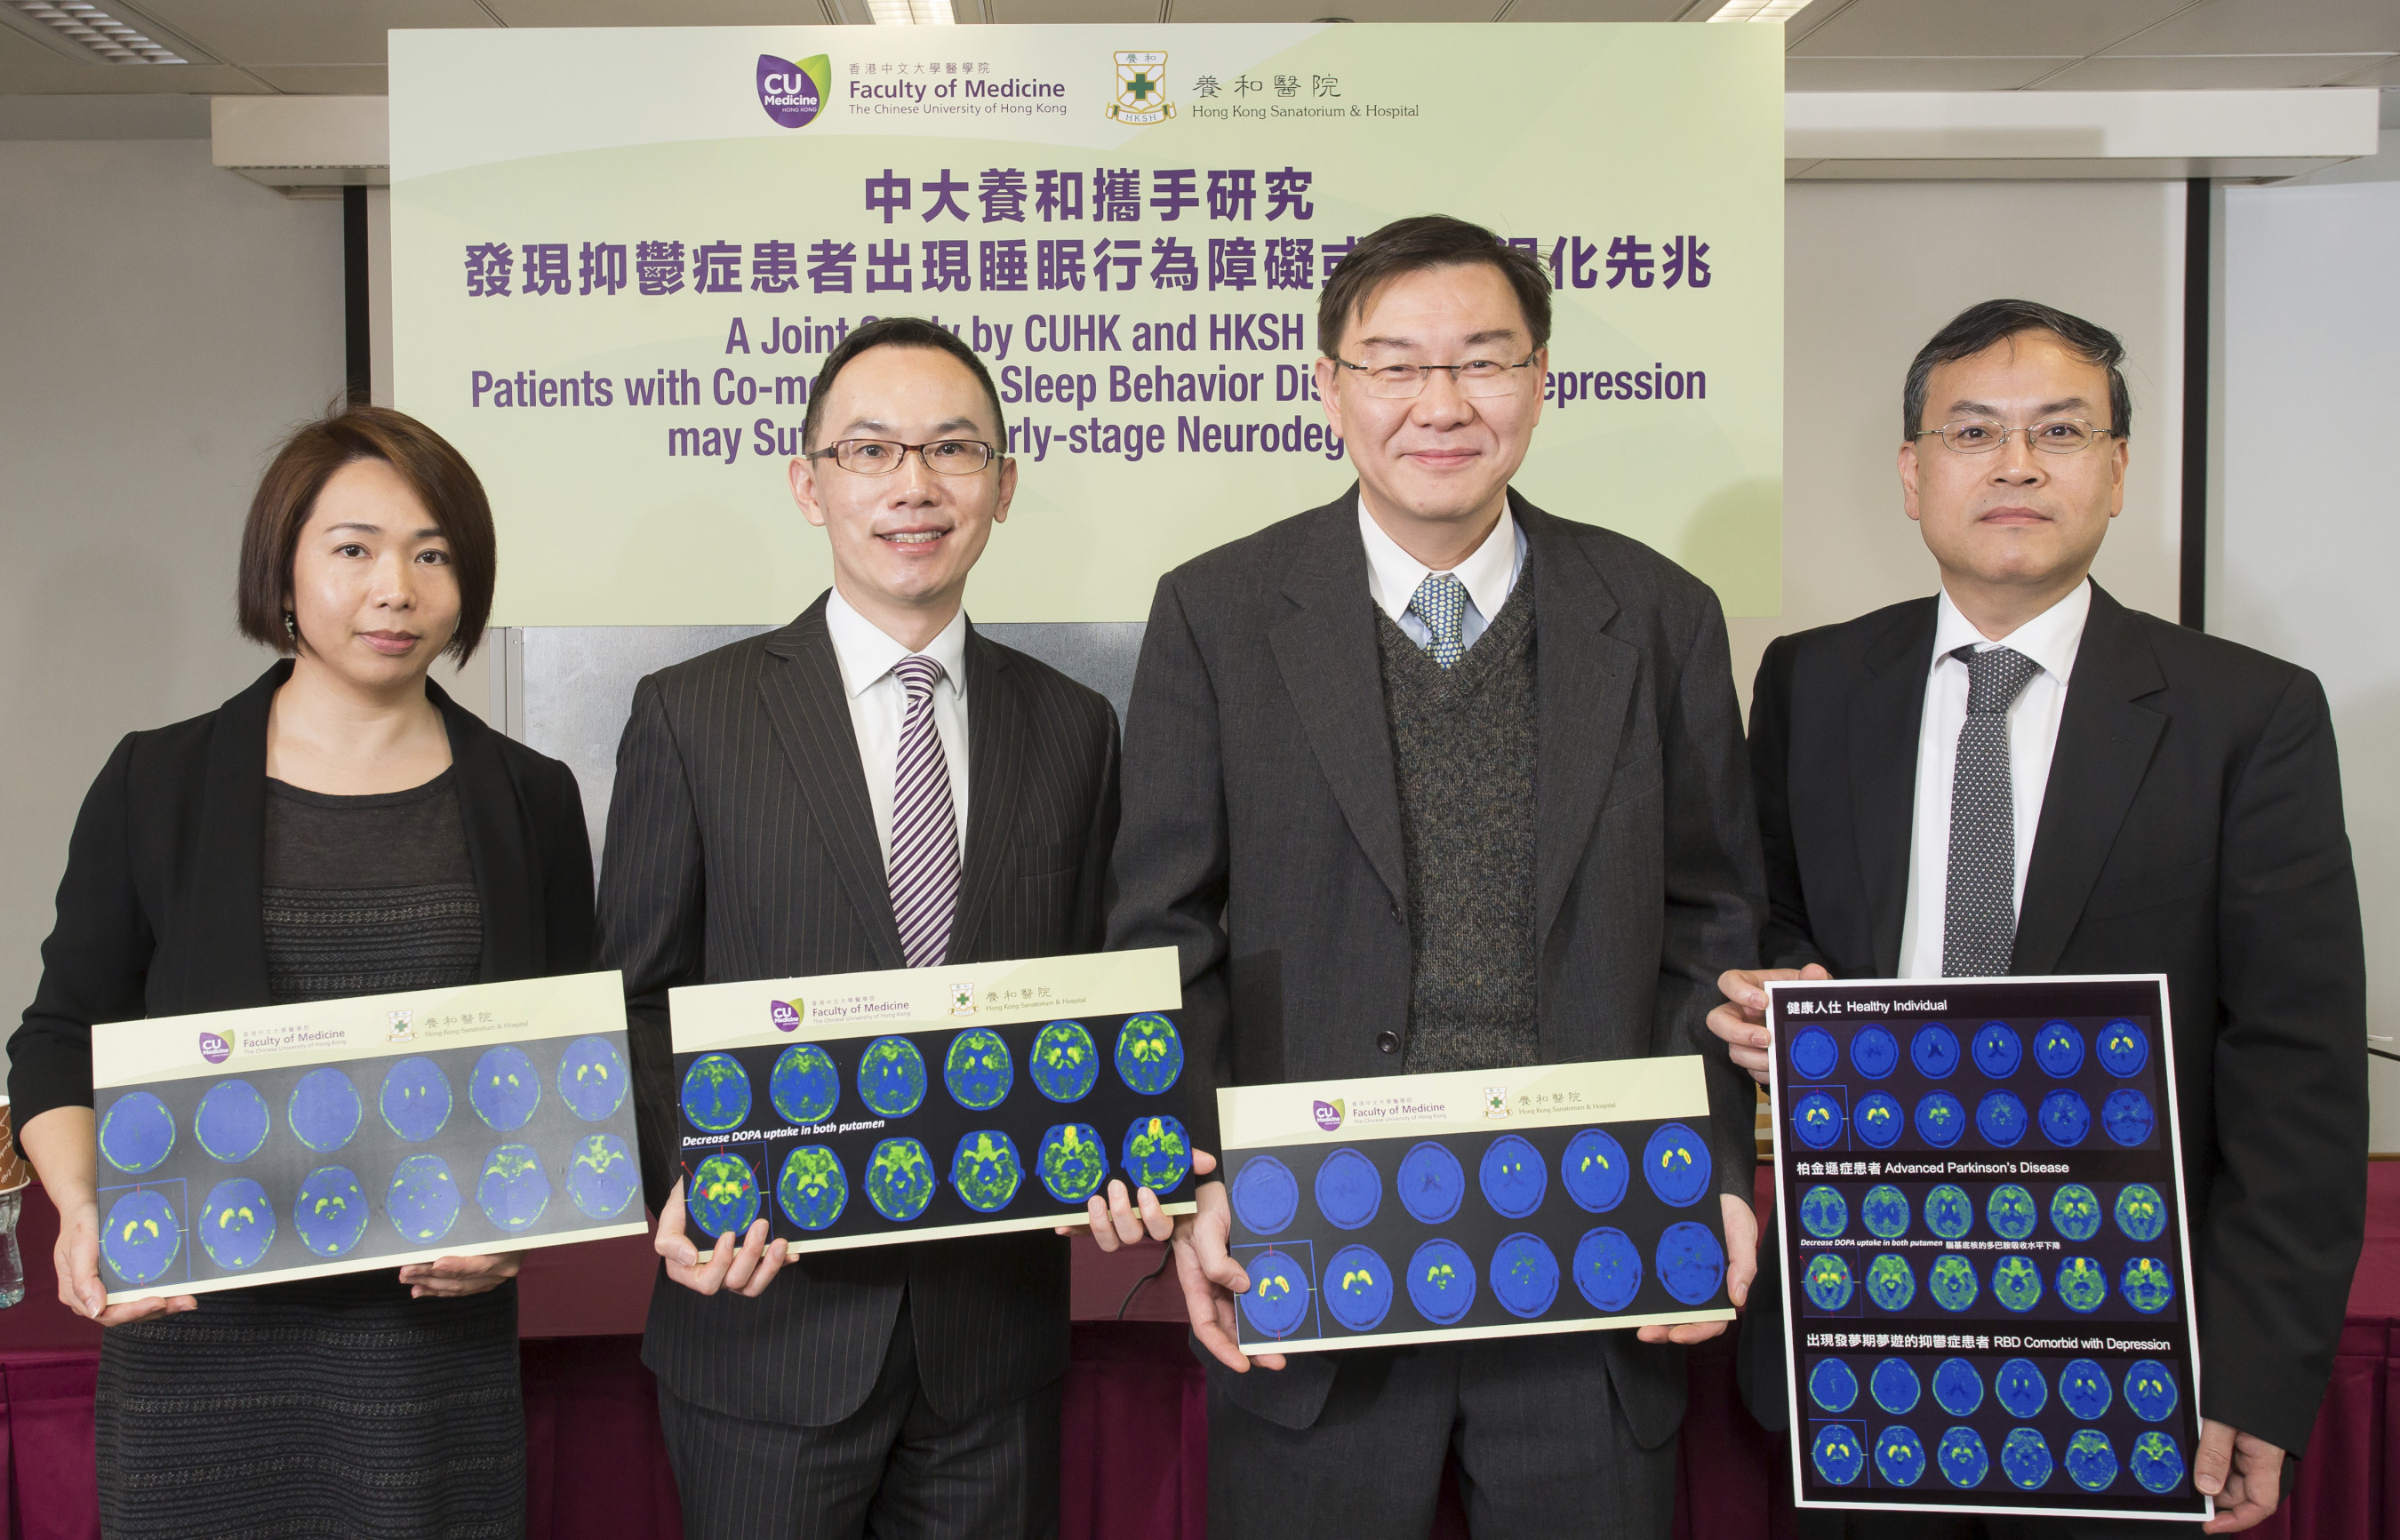 A joint study conducted by Dr. Eric Leung, Deputy Director, Department of Nuclear Medicine and Positron Emission Tomography